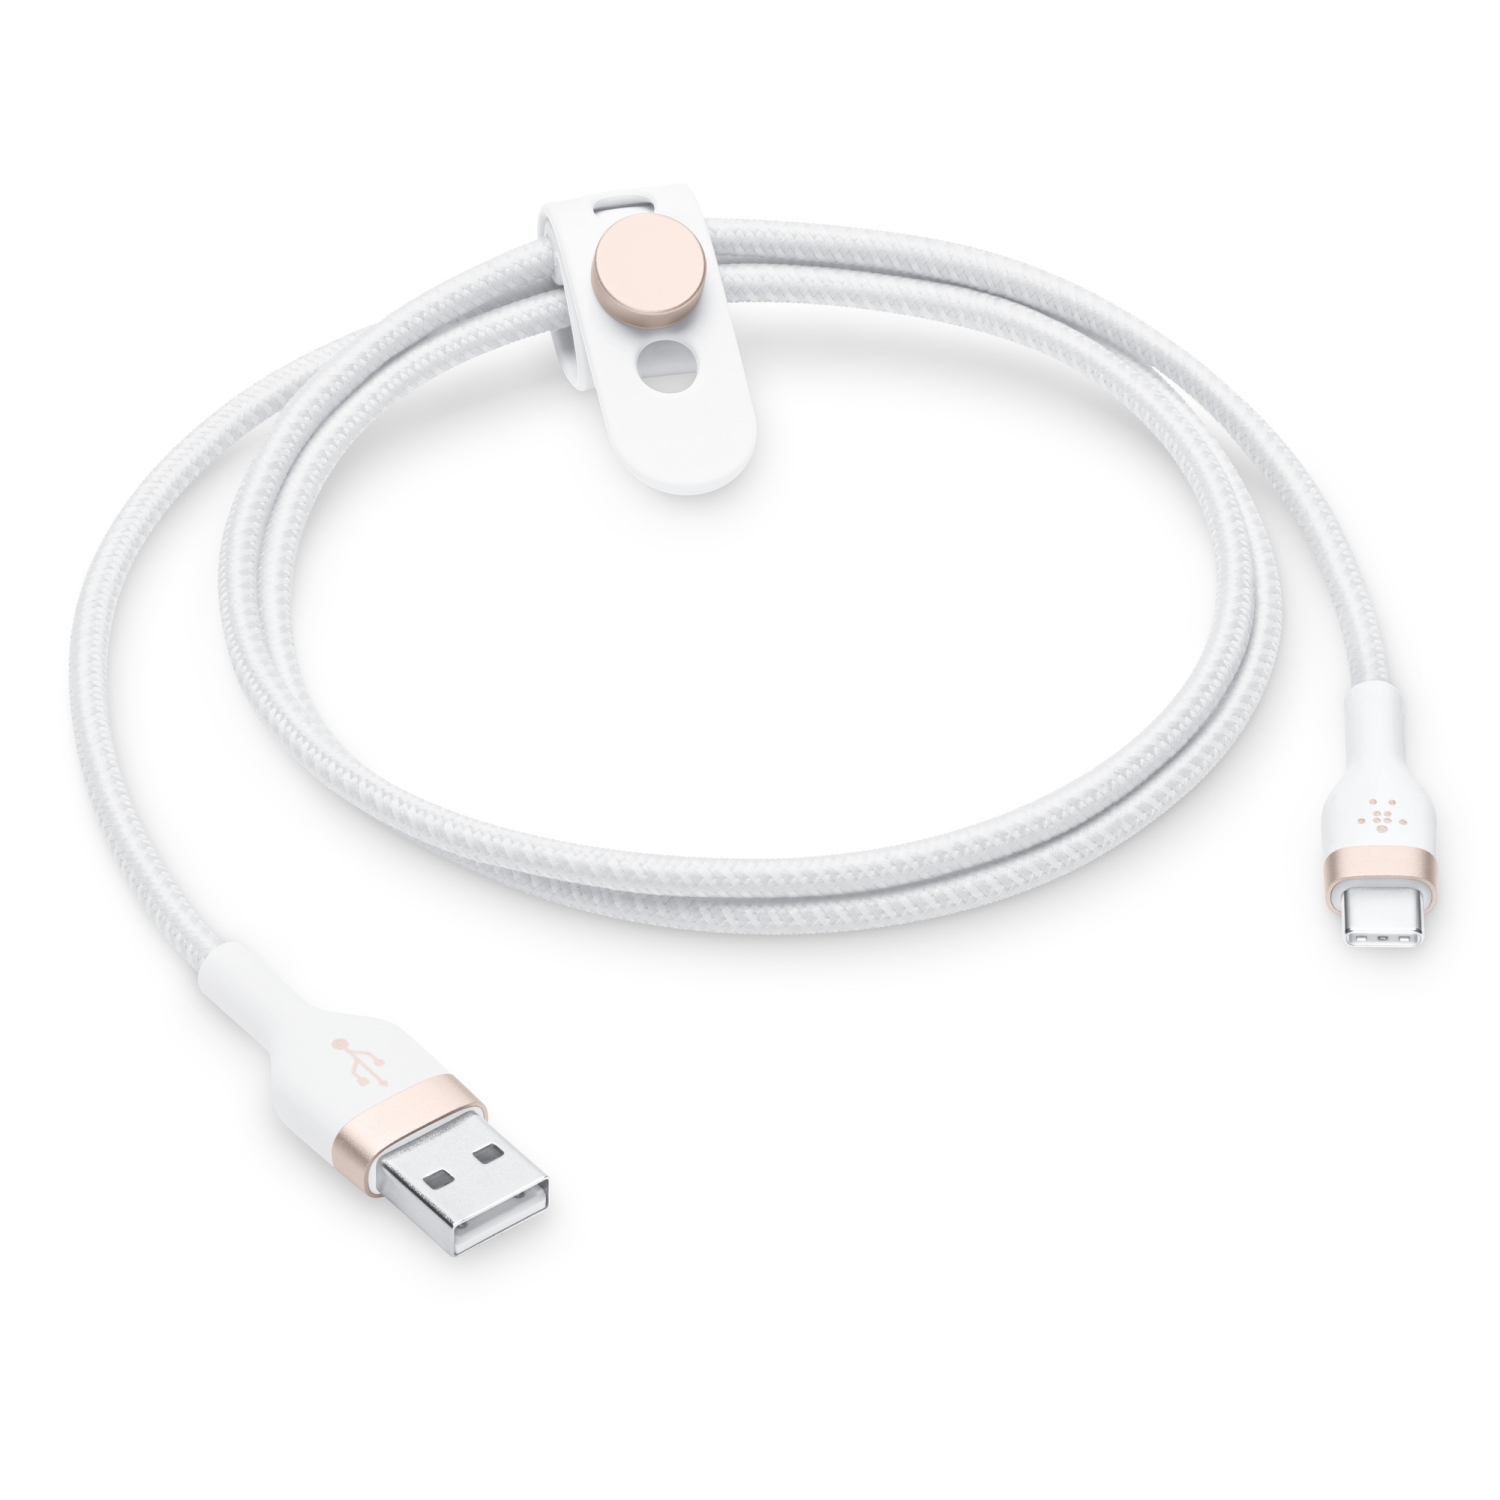 https://static.tweaktown.com/news/9/3/93804_01_apples-finally-selling-usb-cable-so-iphone-15-buyers-can-still-use-carplay_full.jpg